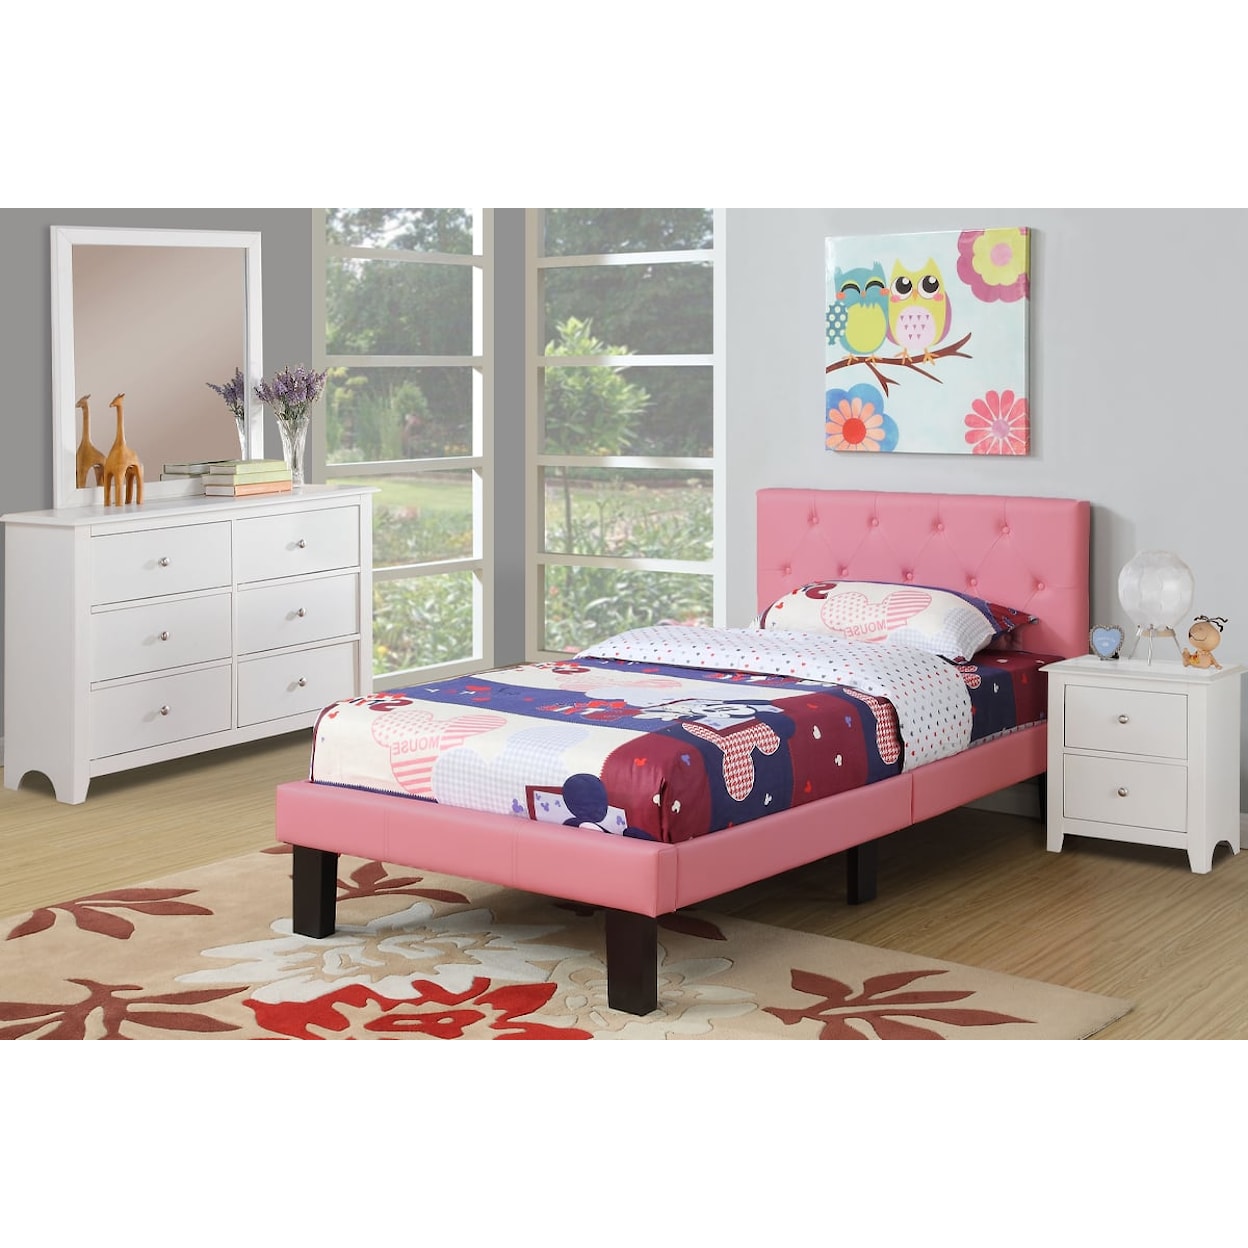 Poundex Twin/Full Beds PINK TWIN BED W/ SLATS |